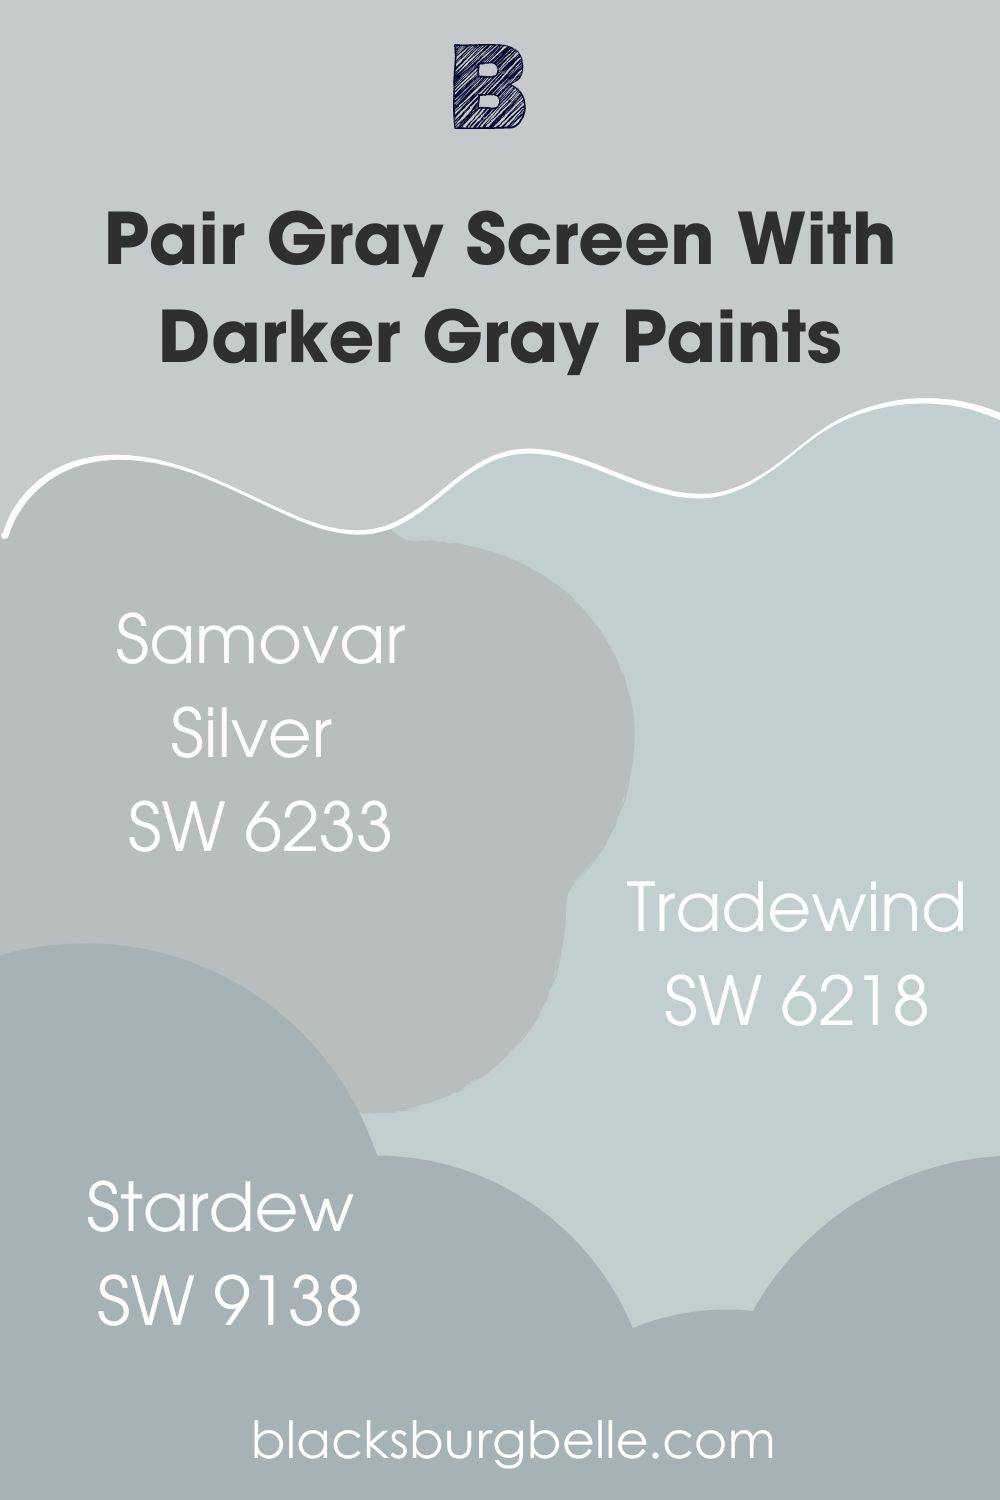 Pair Gray Screen With Darker Gray Paints